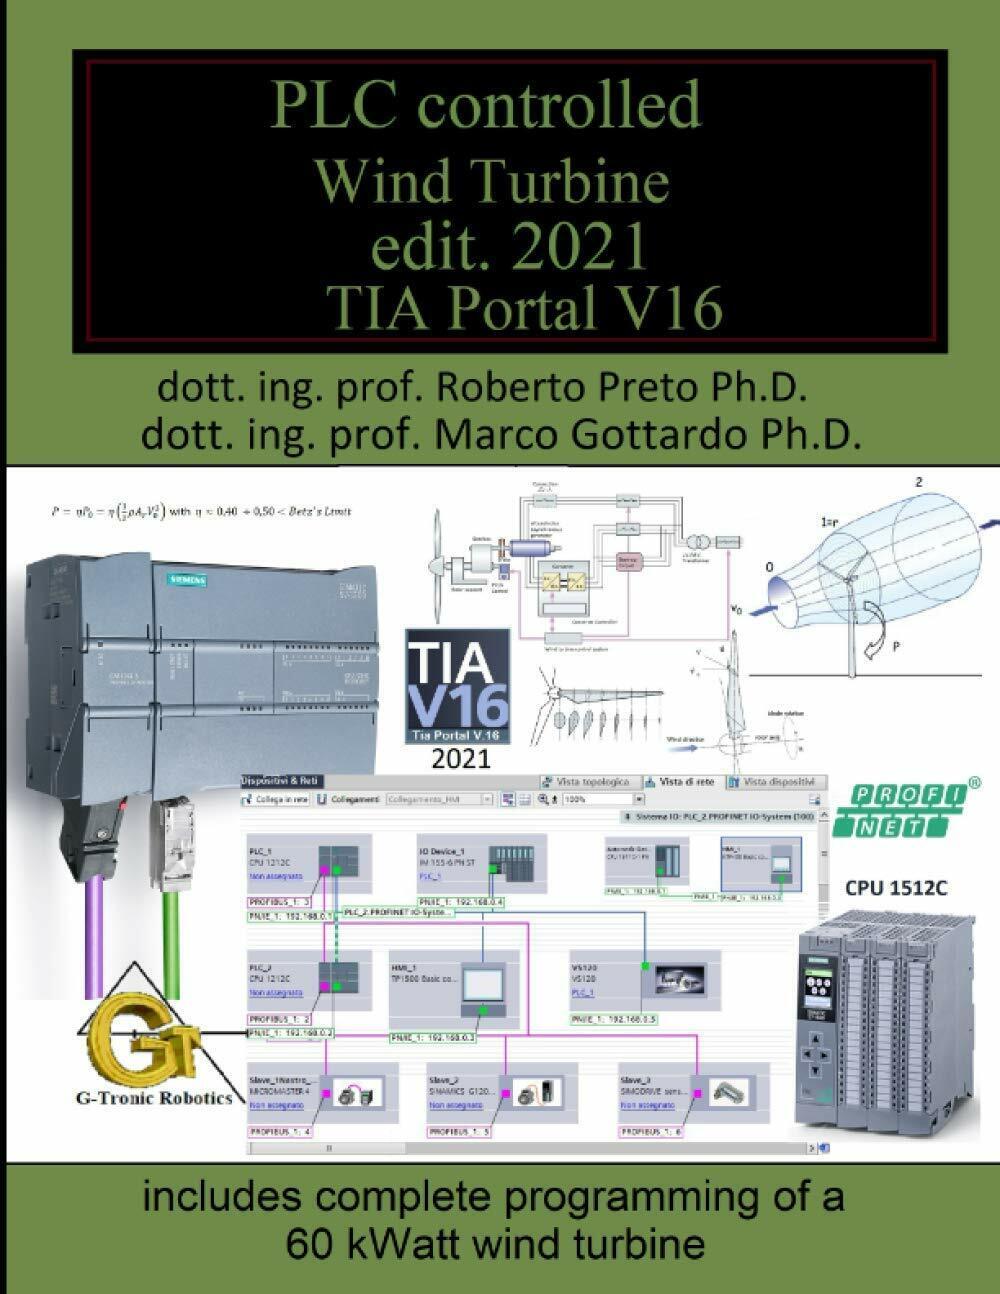 PLC controlled wind turbines edit. 2021: sixth volume of the Let?s program a PLC